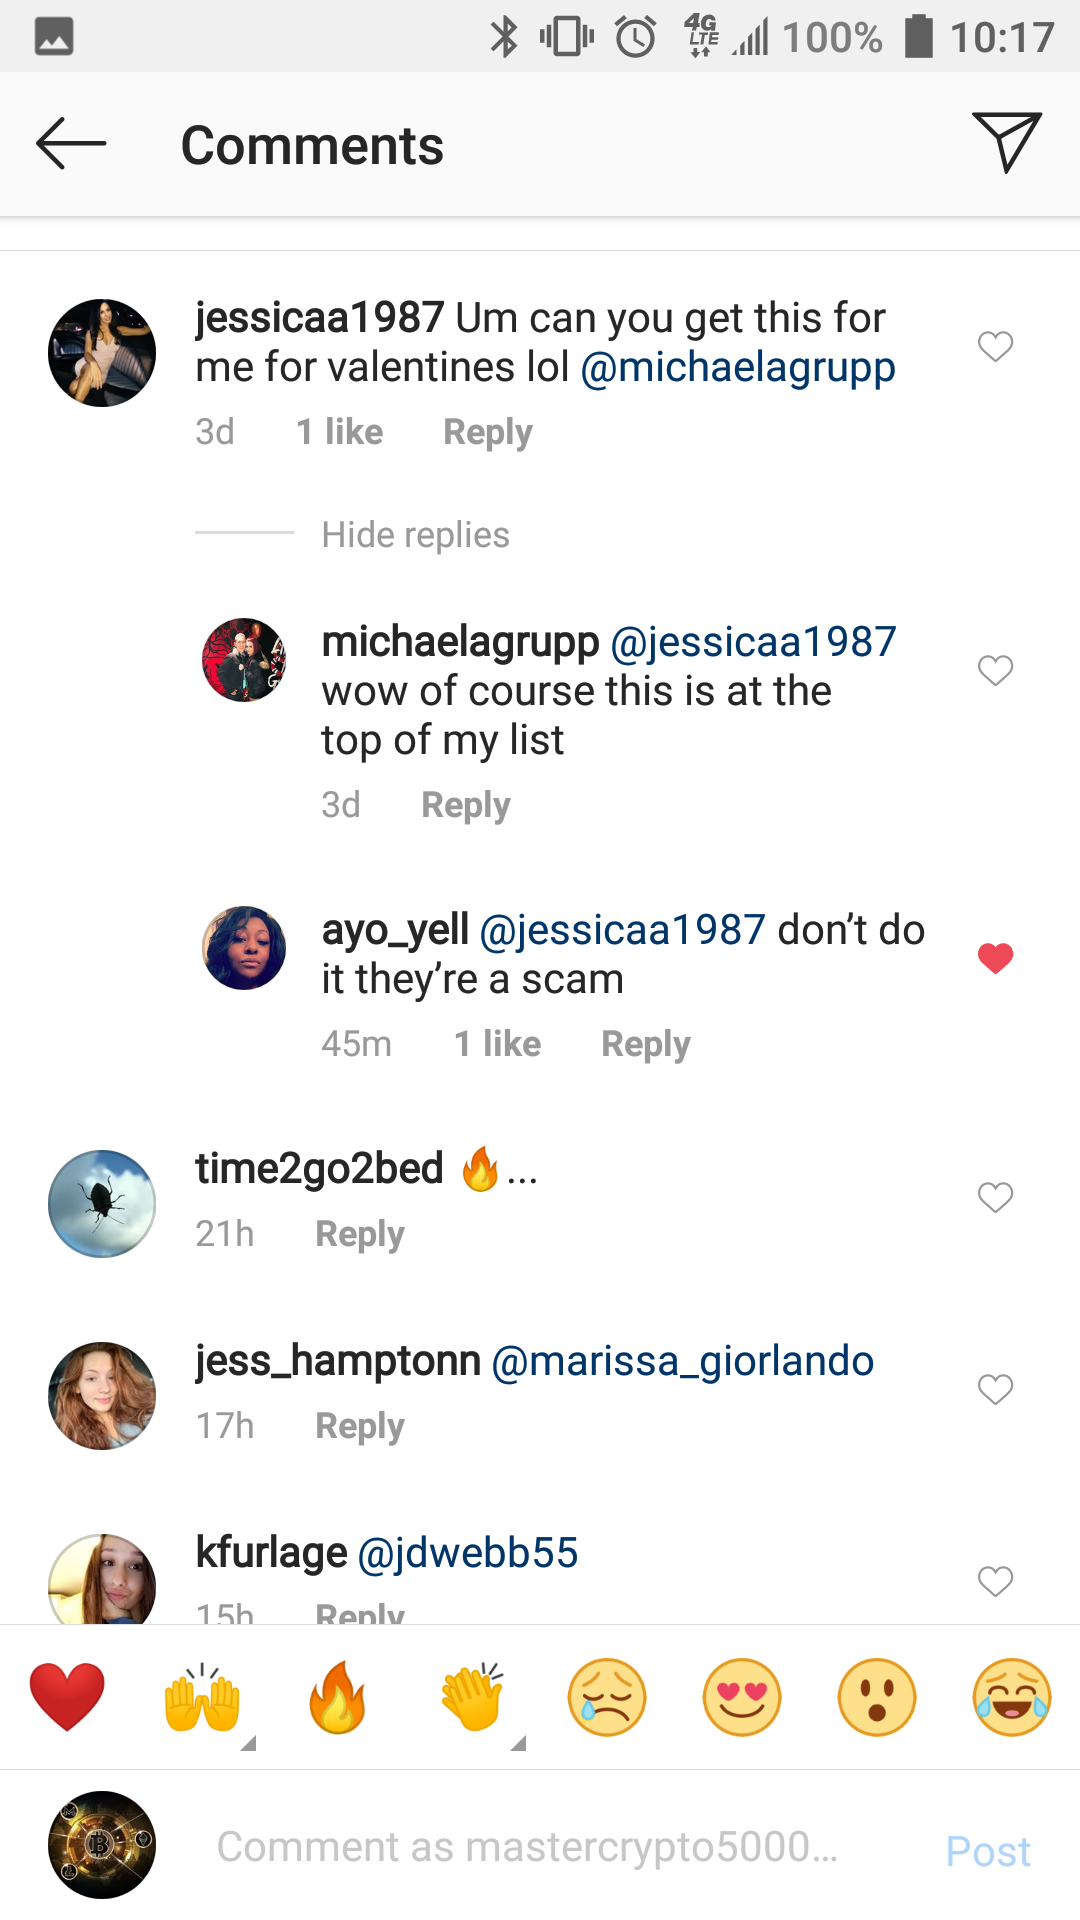 Other people's comments on IG